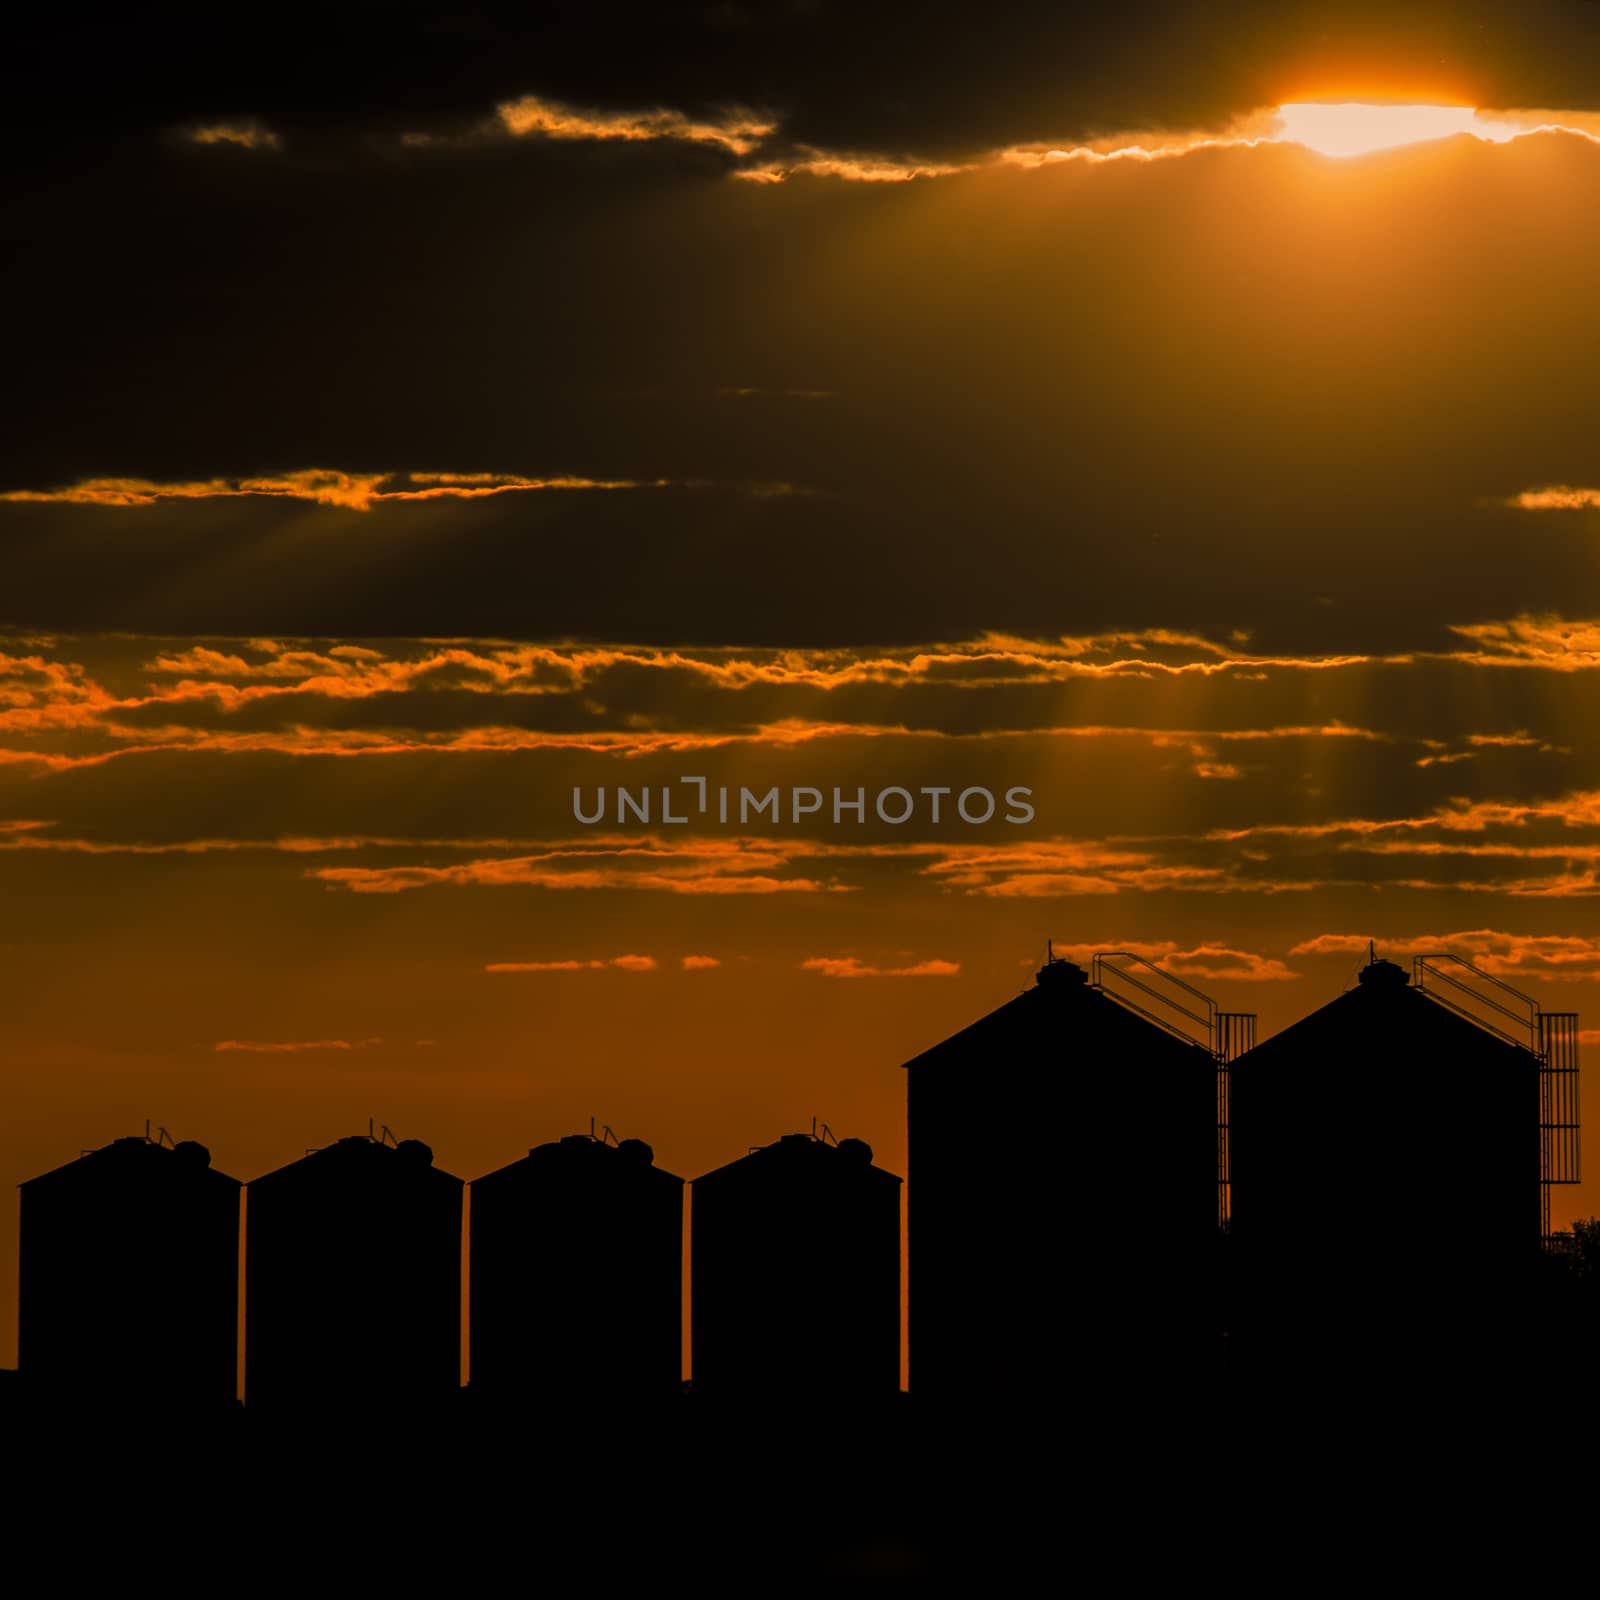 Agricultural silos, storage and drying for grains. by artistrobd